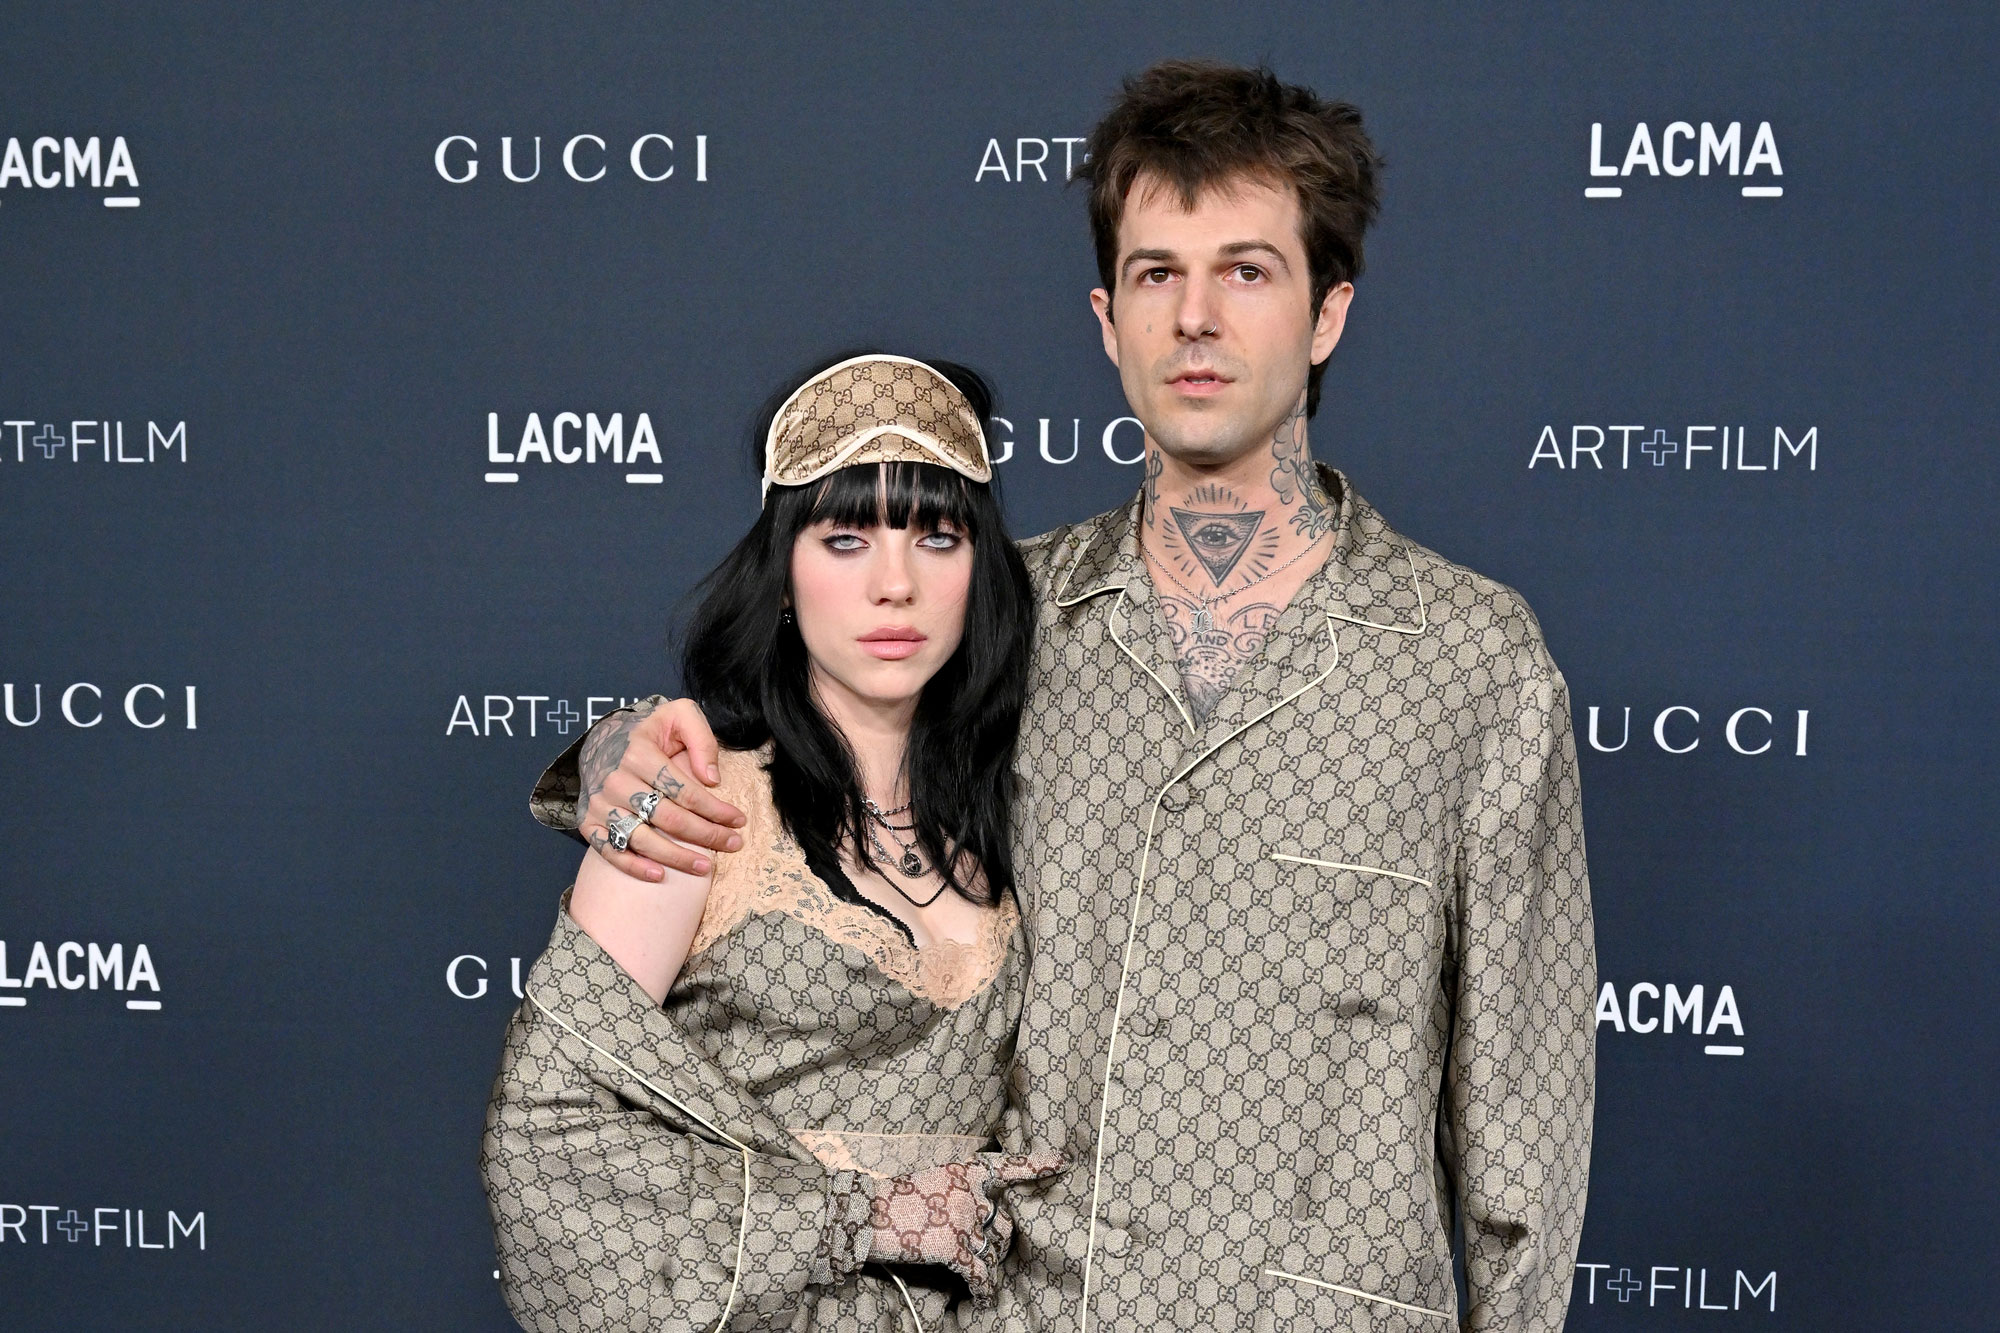 Billie Eilish and Jesse Rutherford attend the 11th Annual LACMA Art + Film Gala at Los Angeles County Museum of Art